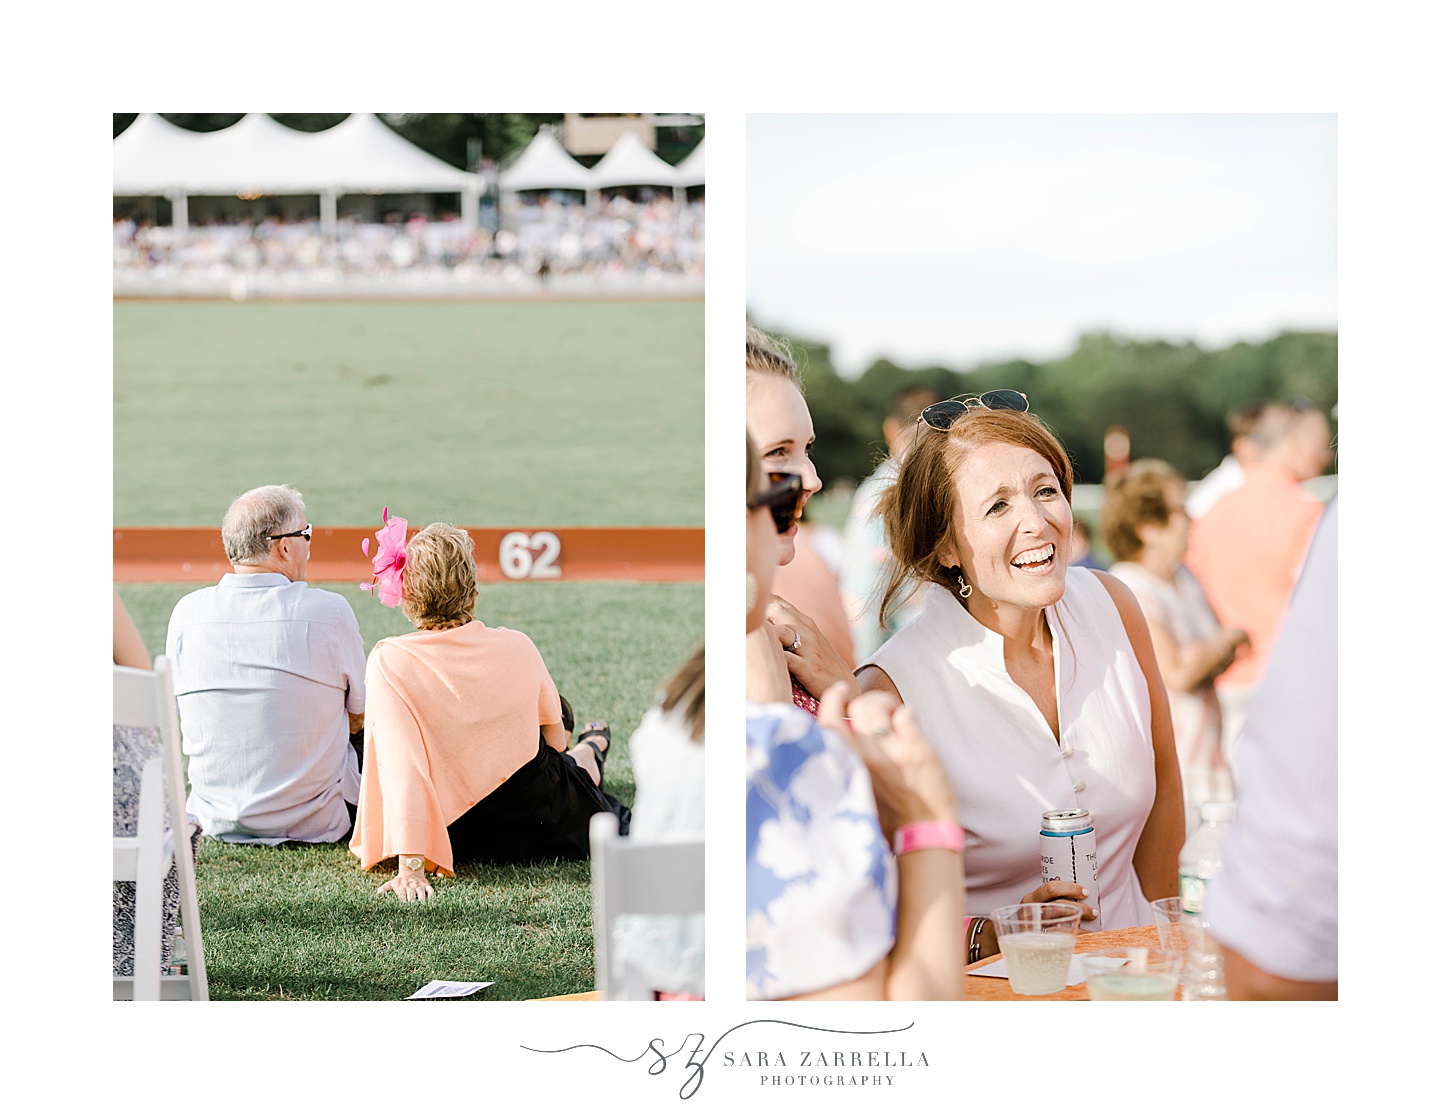 guests watch polo match in Rhode Island